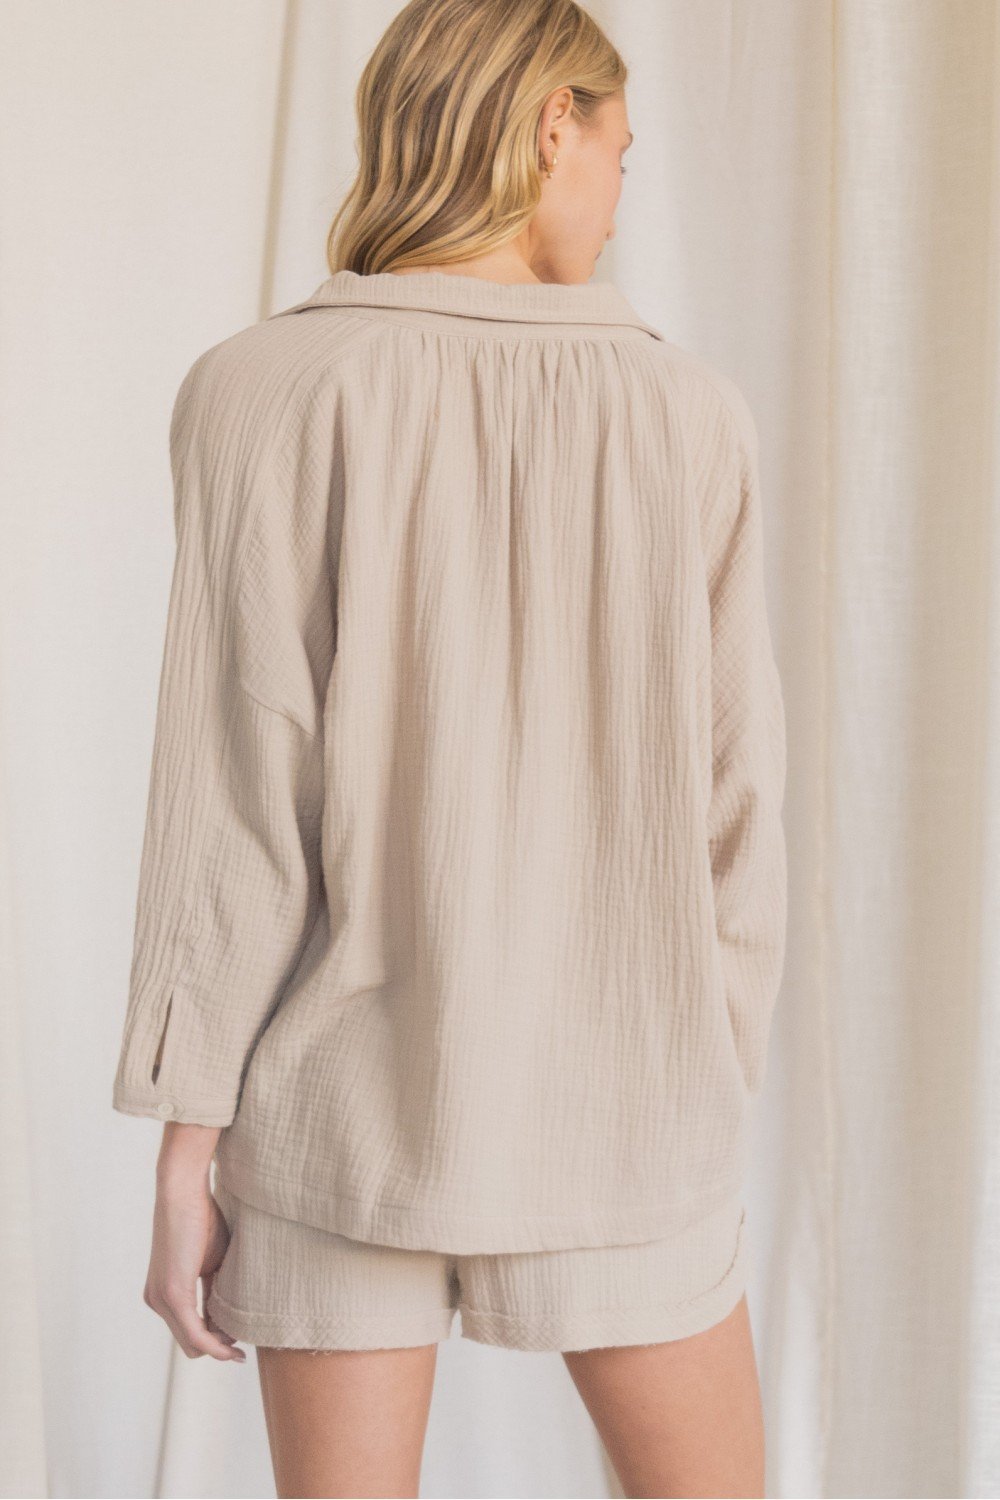 Henley-inspired Gauze Dolman Sleeve Collared Top with Buttoned Neckline  Ivy and Pearl Boutique   